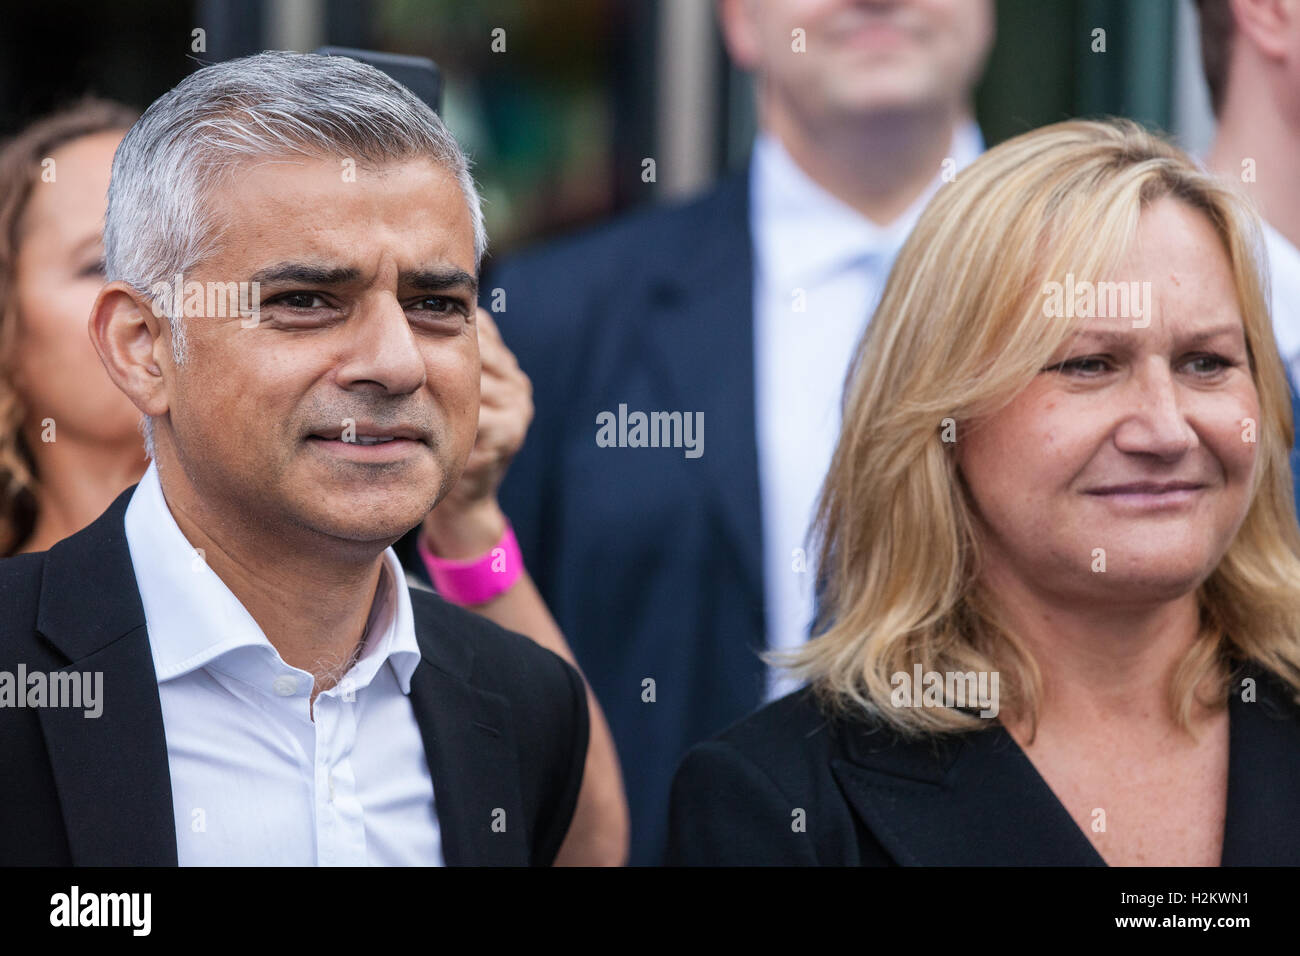 London, UK. 29th September, 2016. The Mayor of London, Sadiq Khan, launches the new London Curriculum for primary schools at the London Curriculum Festival at the Scoop, accompanied by Yelena Baturina, founder of the Be Open Foundation. More than 1,800 primary schools across 33 London boroughs will be able to bring learning to life, inspired by London’s people, places and heritage, as part of the new ‘Going Underground’ unit on the London Curriculum. Credit:  Mark Kerrison/Alamy Live News Stock Photo